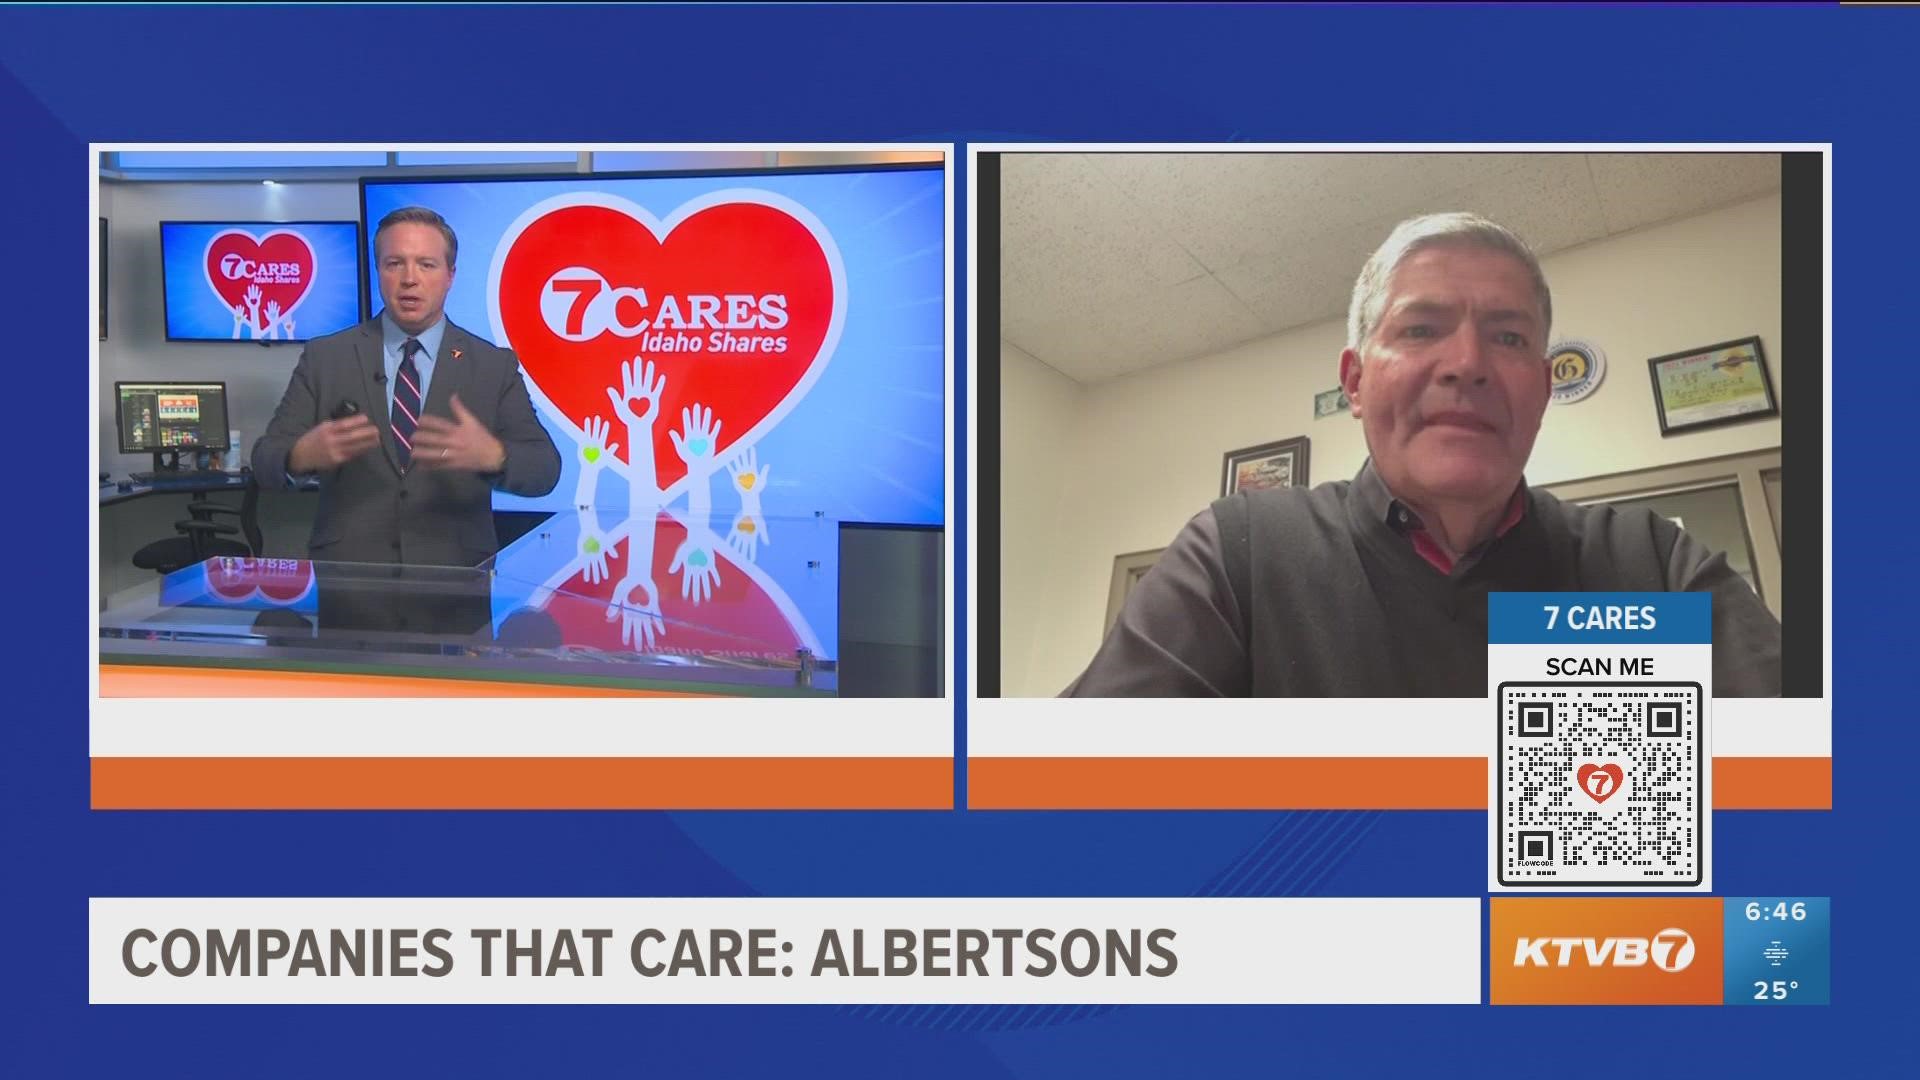 7 Cares Idaho Shares continues through Dec. 10. Donations from companies like Albertsons and generous people like you help address hunger and homelessness in Idaho.